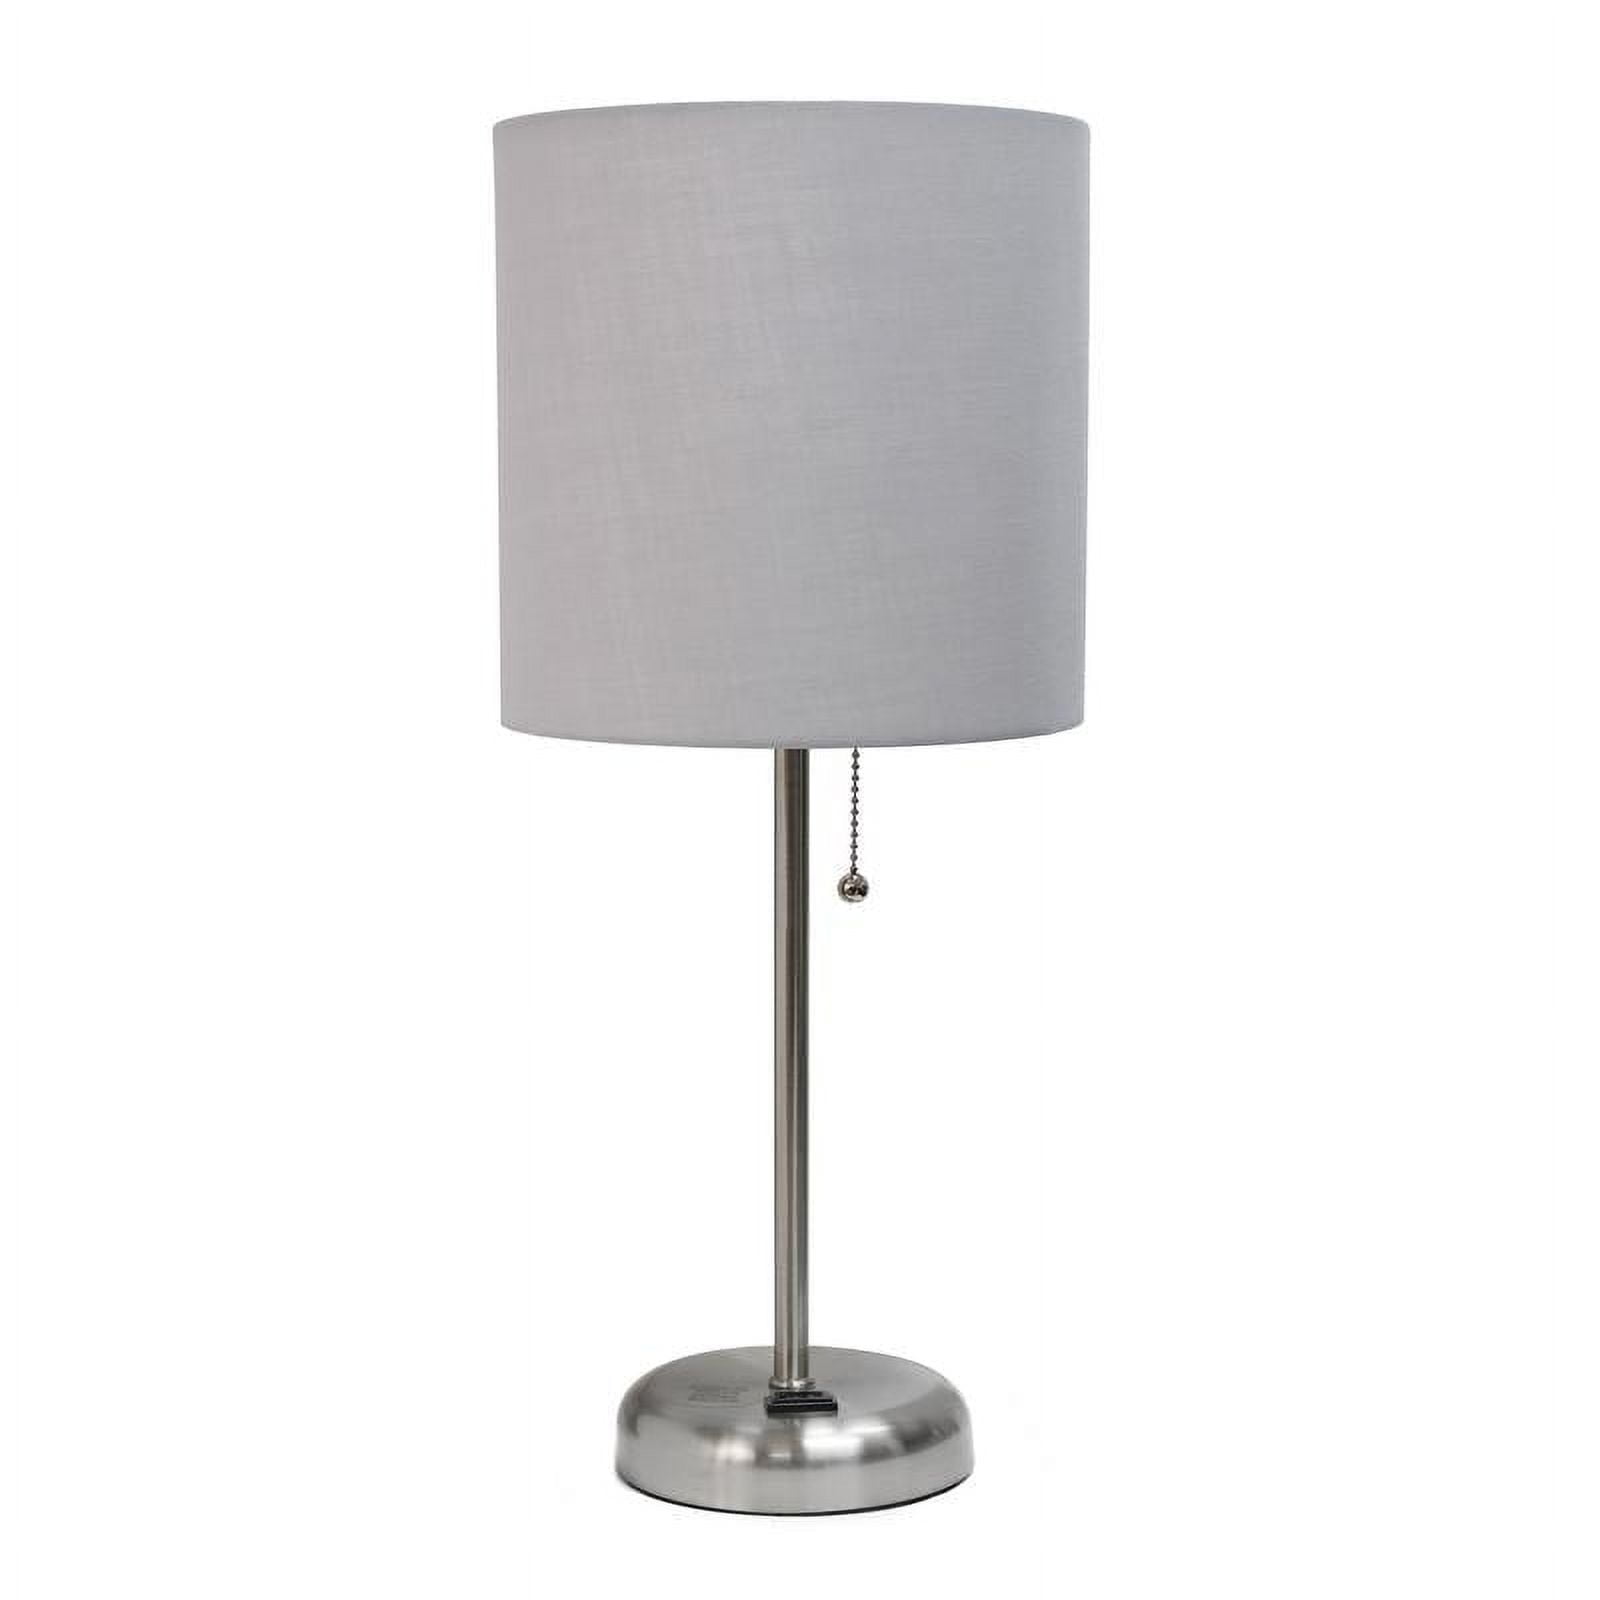 Stick Lamp With Charging Outlet & Fabric Shade, Gray